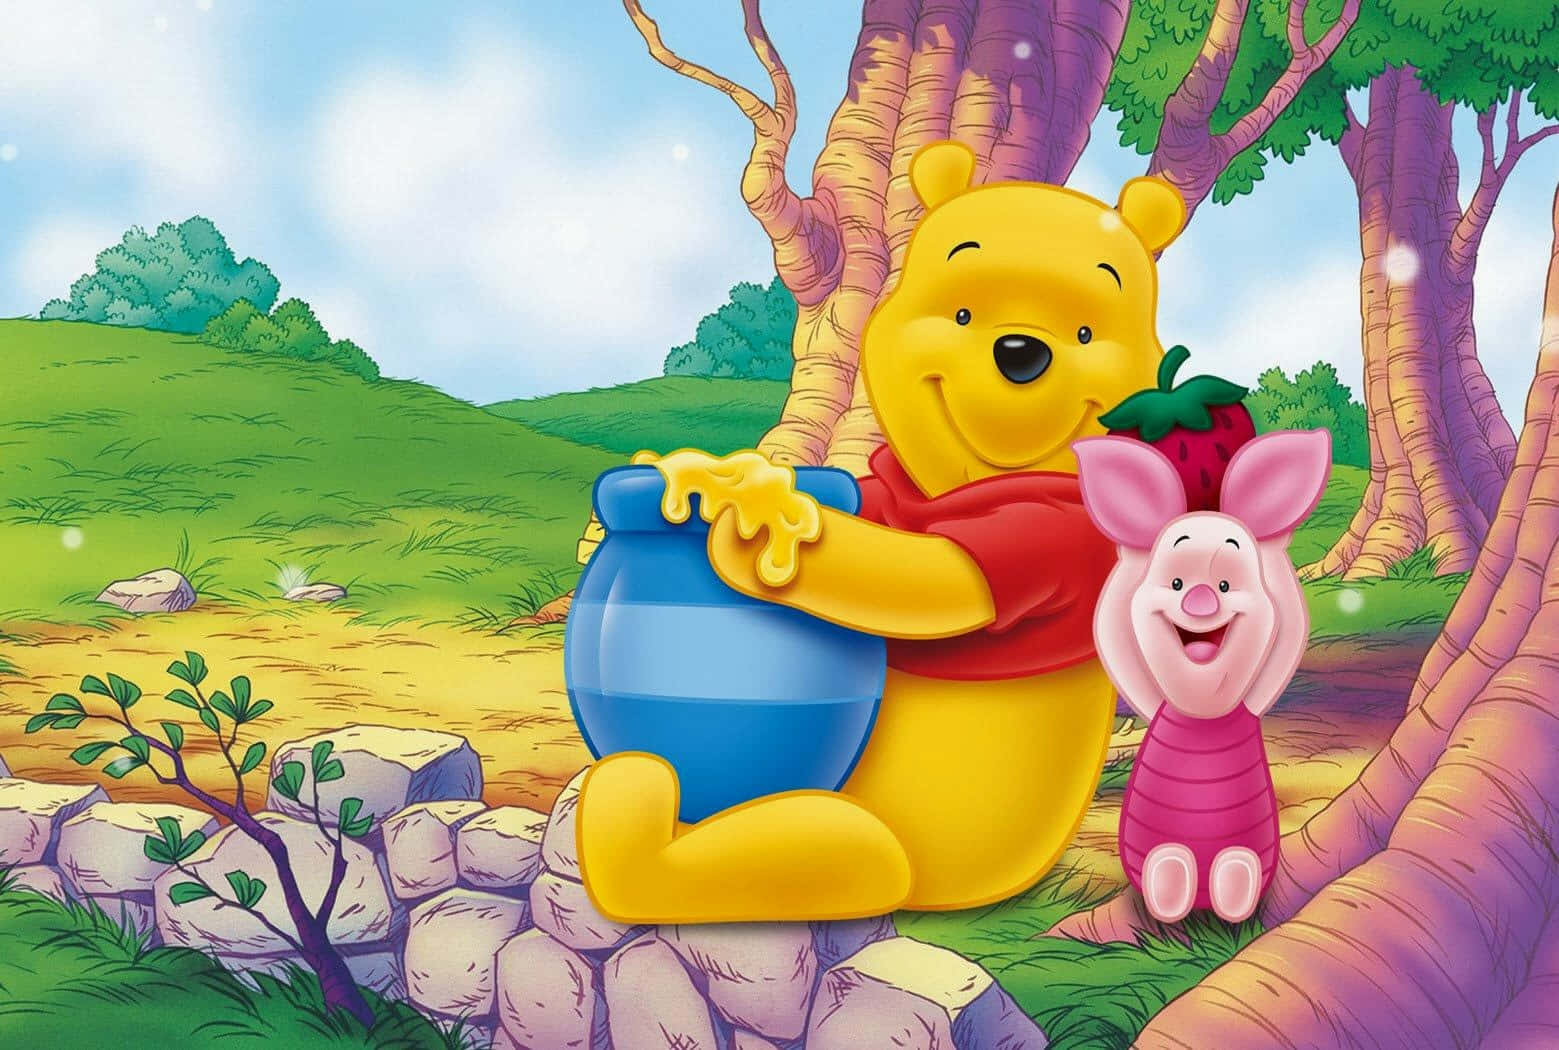 Celebrating Winnie the Pooh and his Friends